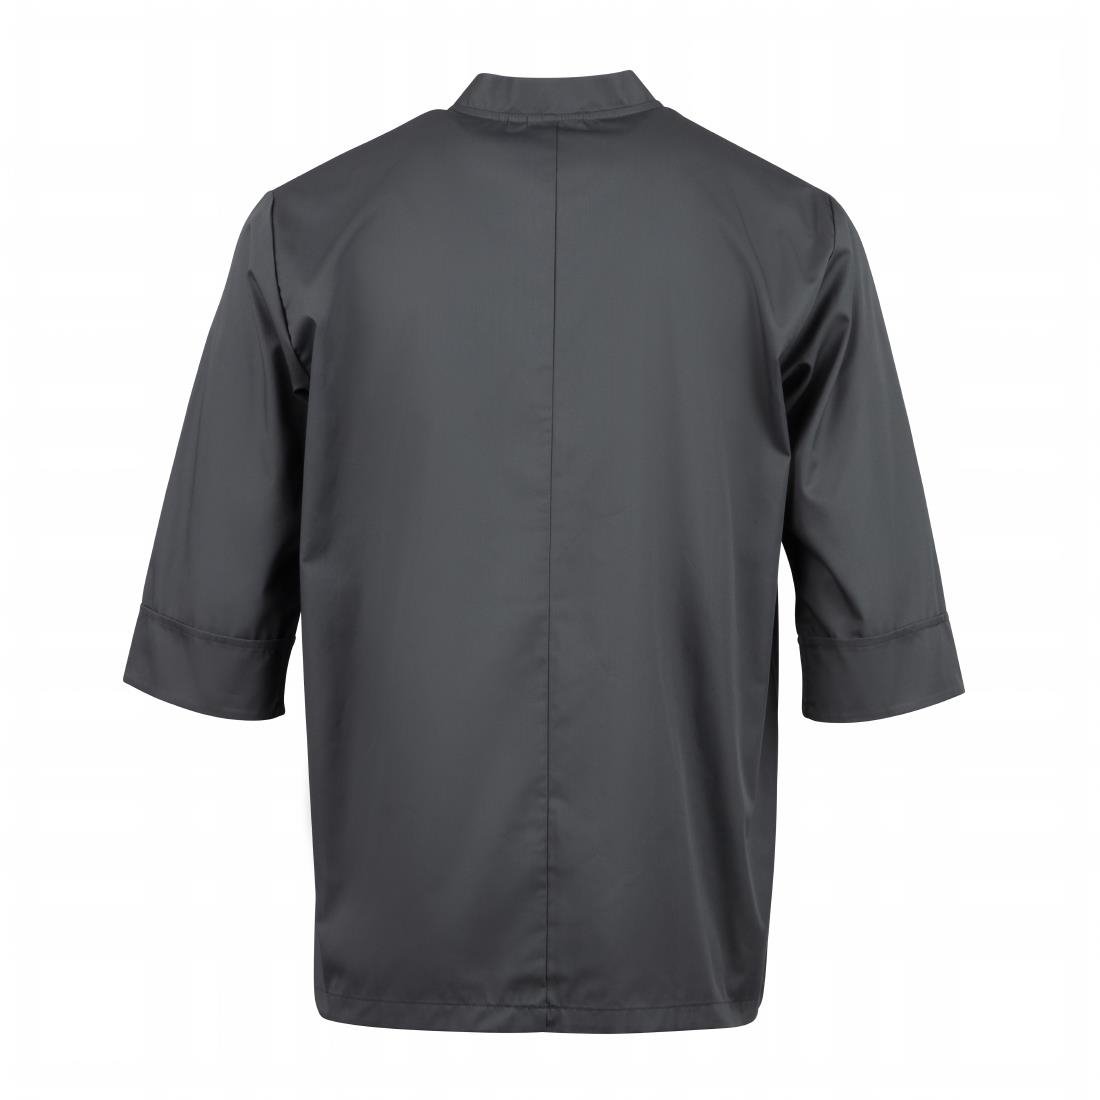 A934-XL Chef Works Unisex Chefs Jacket Grey XL JD Catering Equipment Solutions Ltd